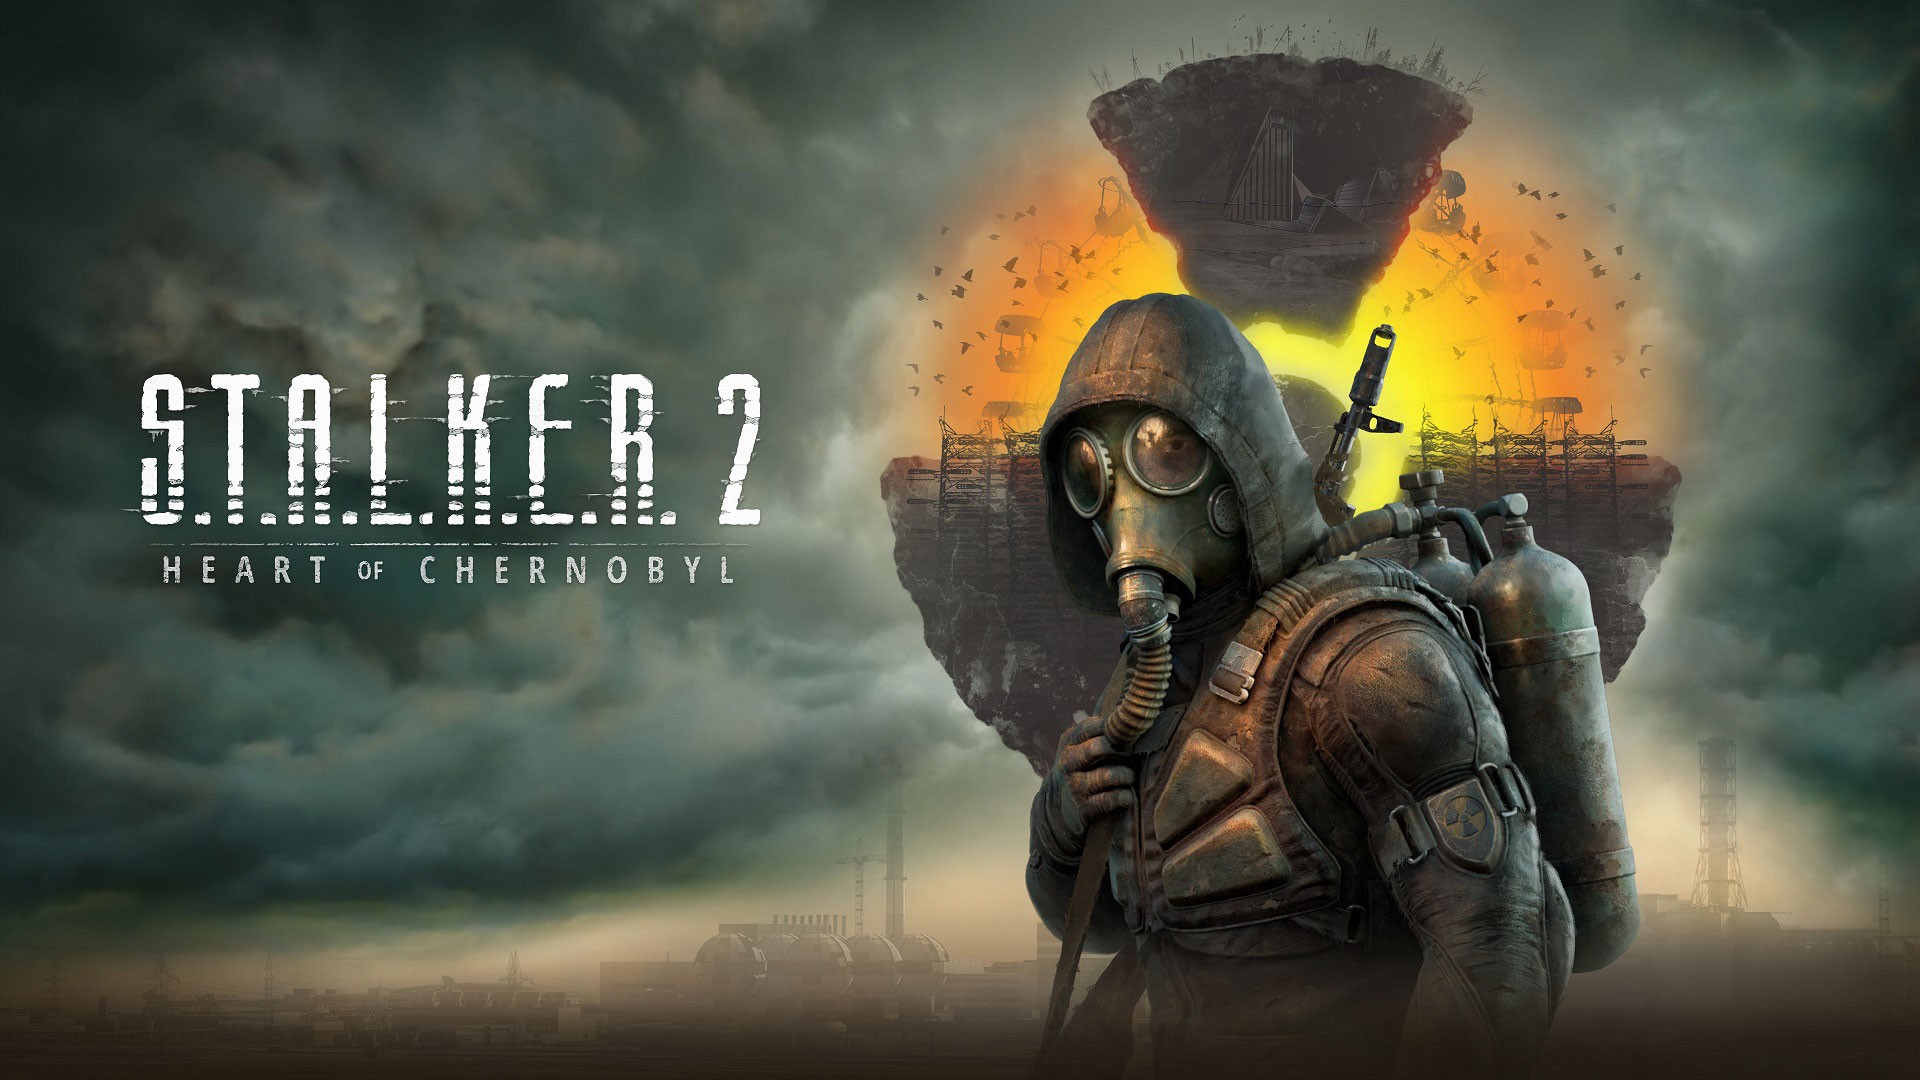 The S.T.A.L.K.E.R Trilogy is now available on Xbox Series X/S and Xbox One